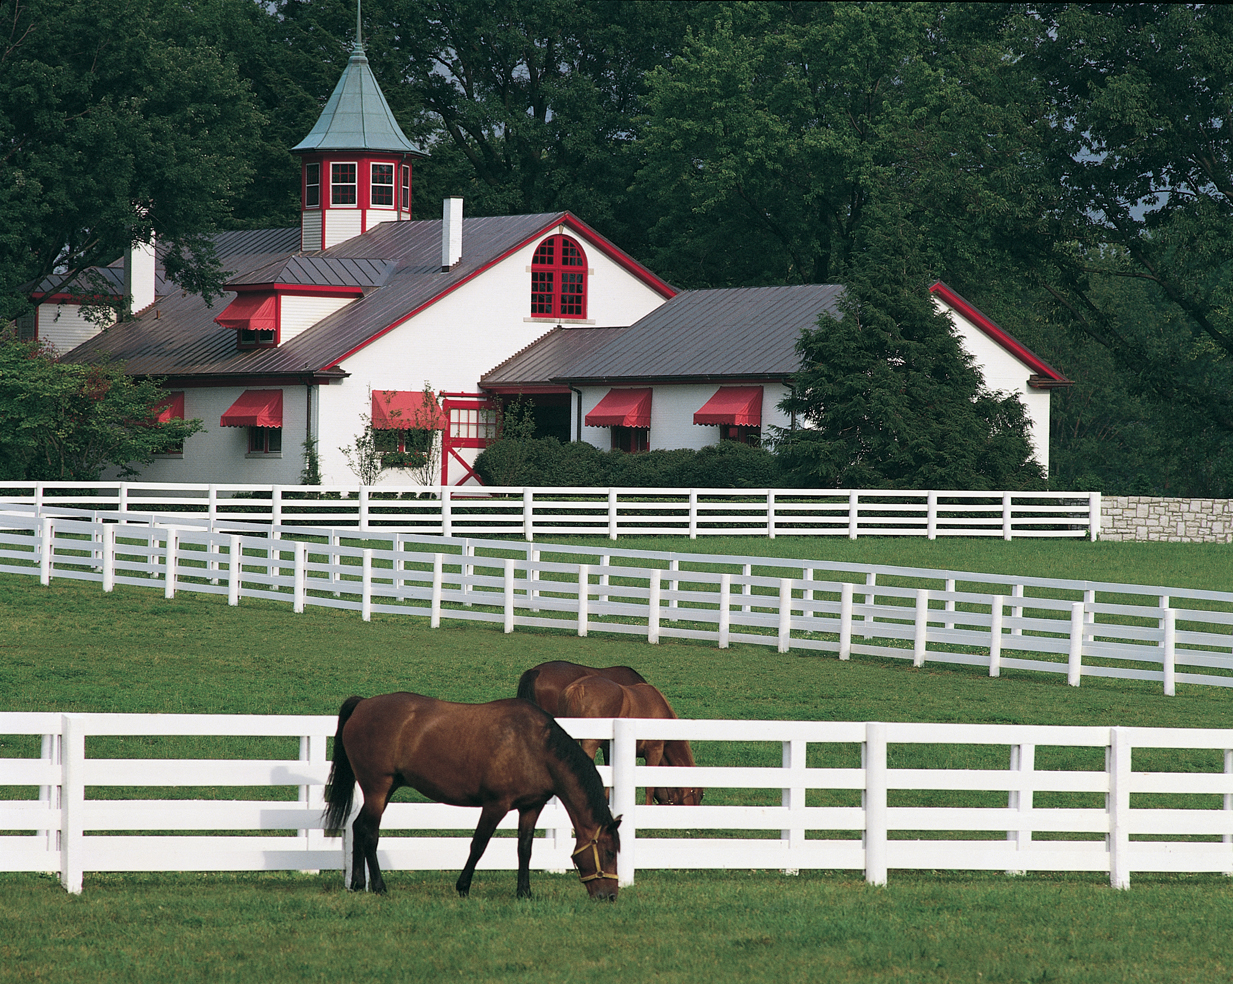 Two brown horses grazing in paddocks in front of a white barn with red trim.